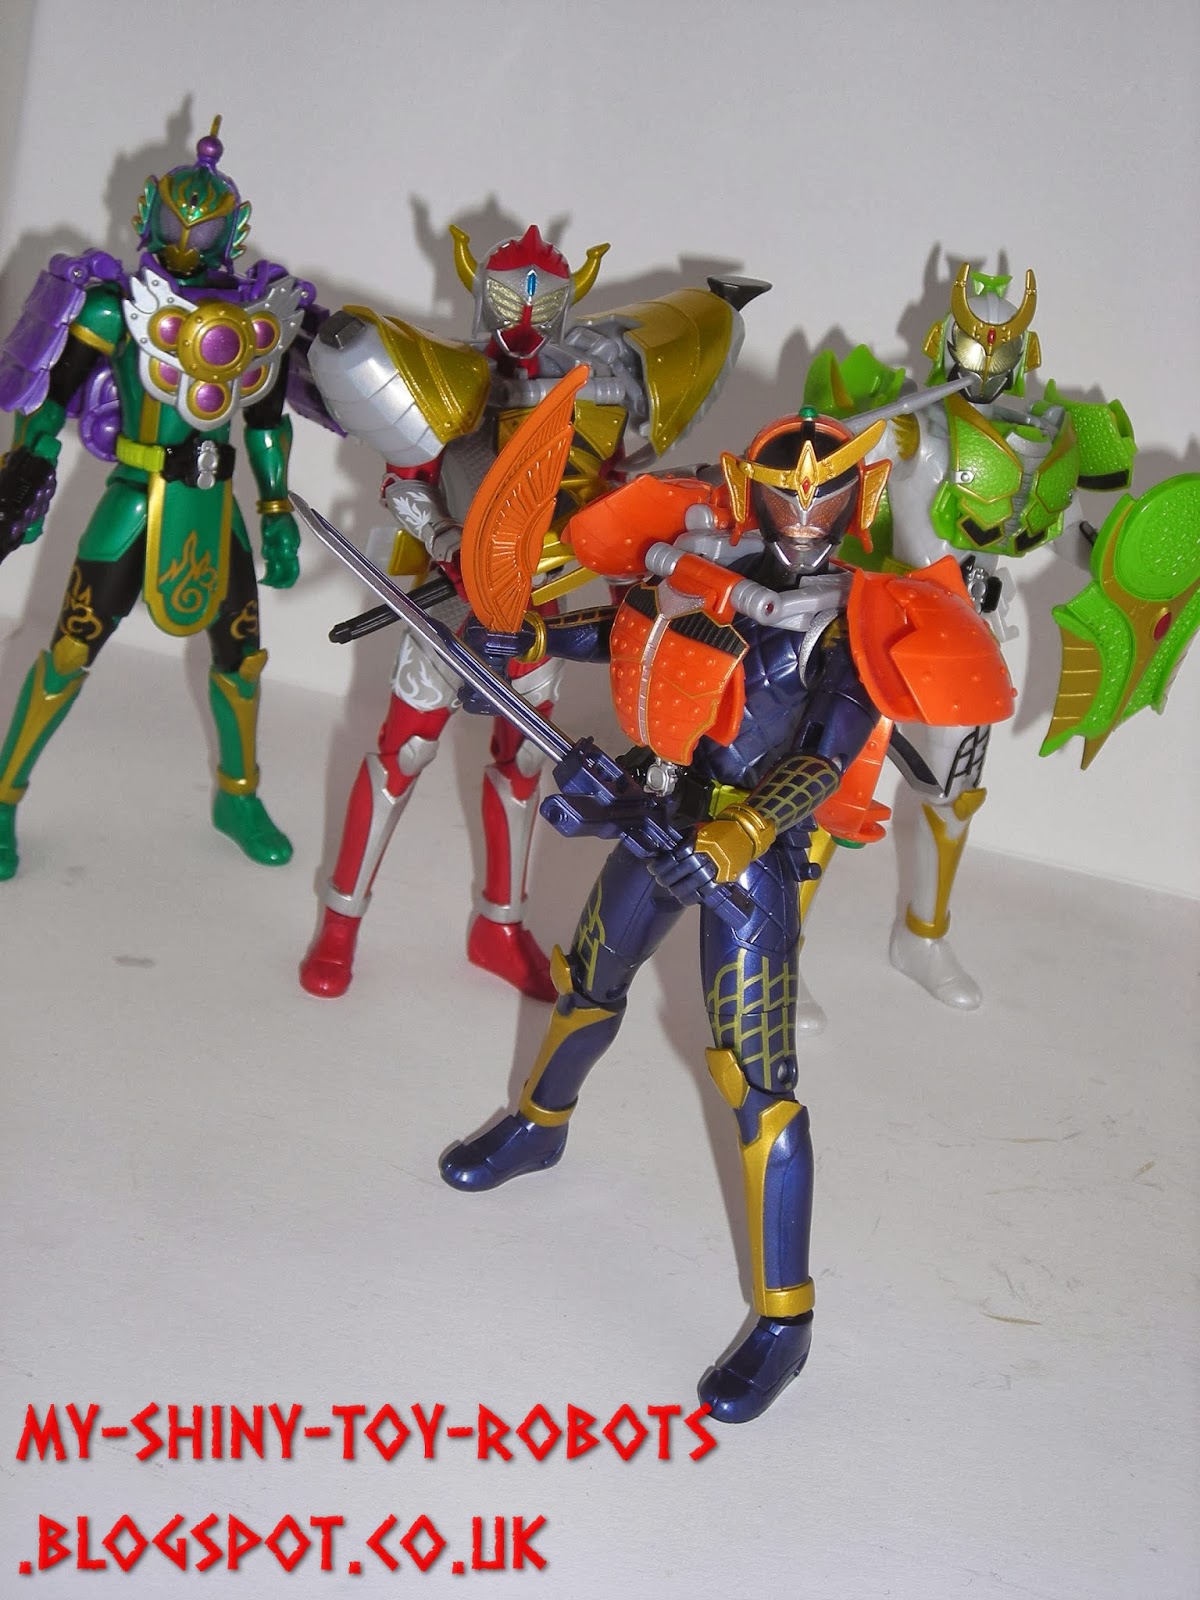 Armored Riders together!